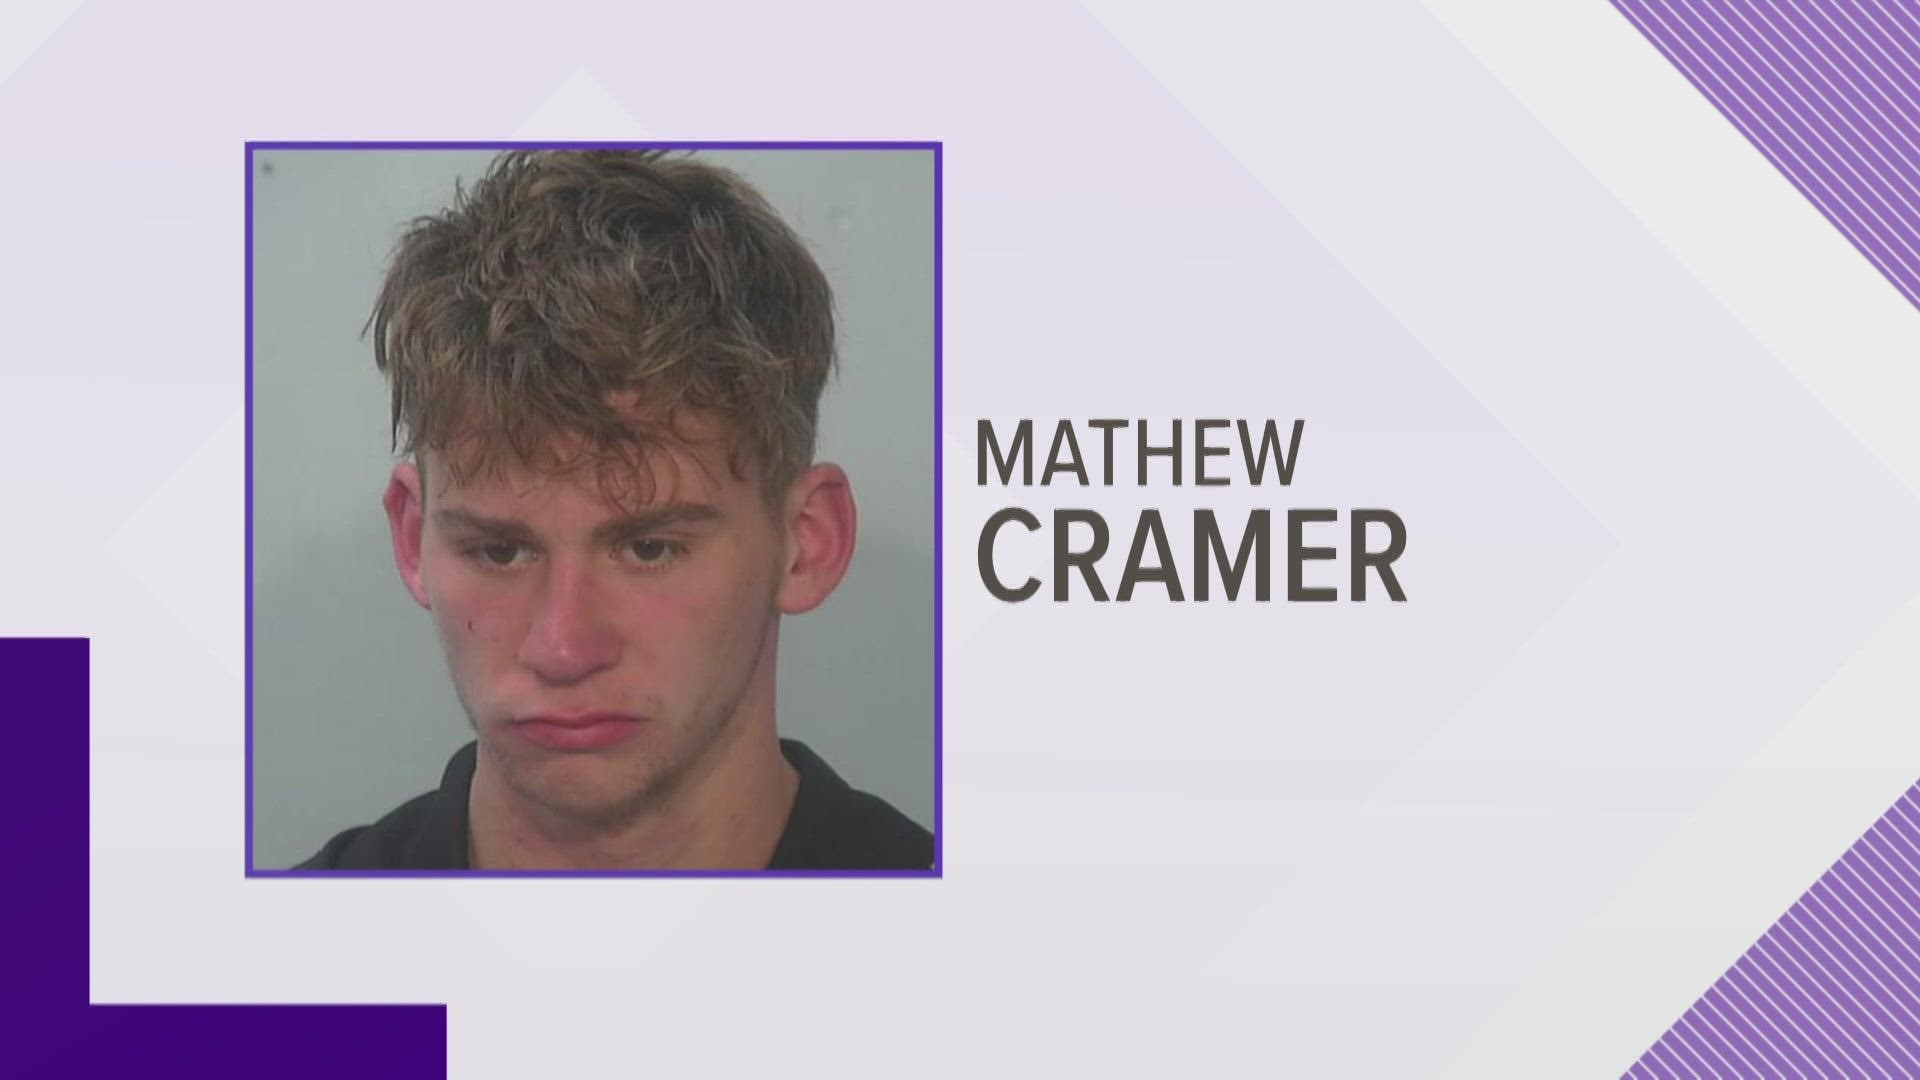 A jury convicted Matthew Cramer of murder abuse of a corpse and resisting law enforcement.